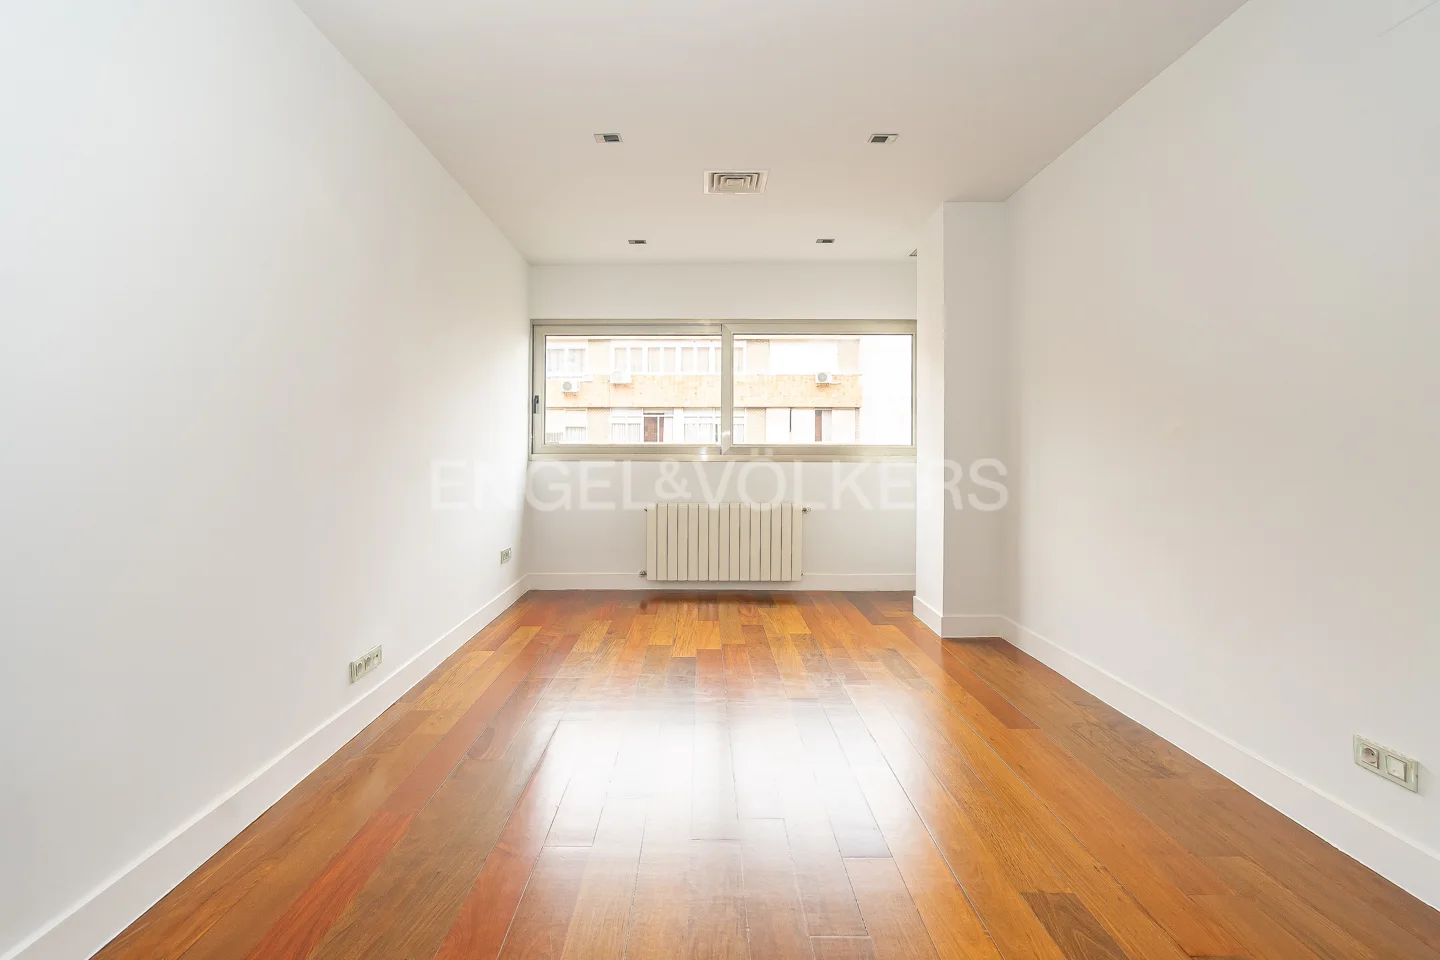 Unfurnished and bright apartment close to Orense street